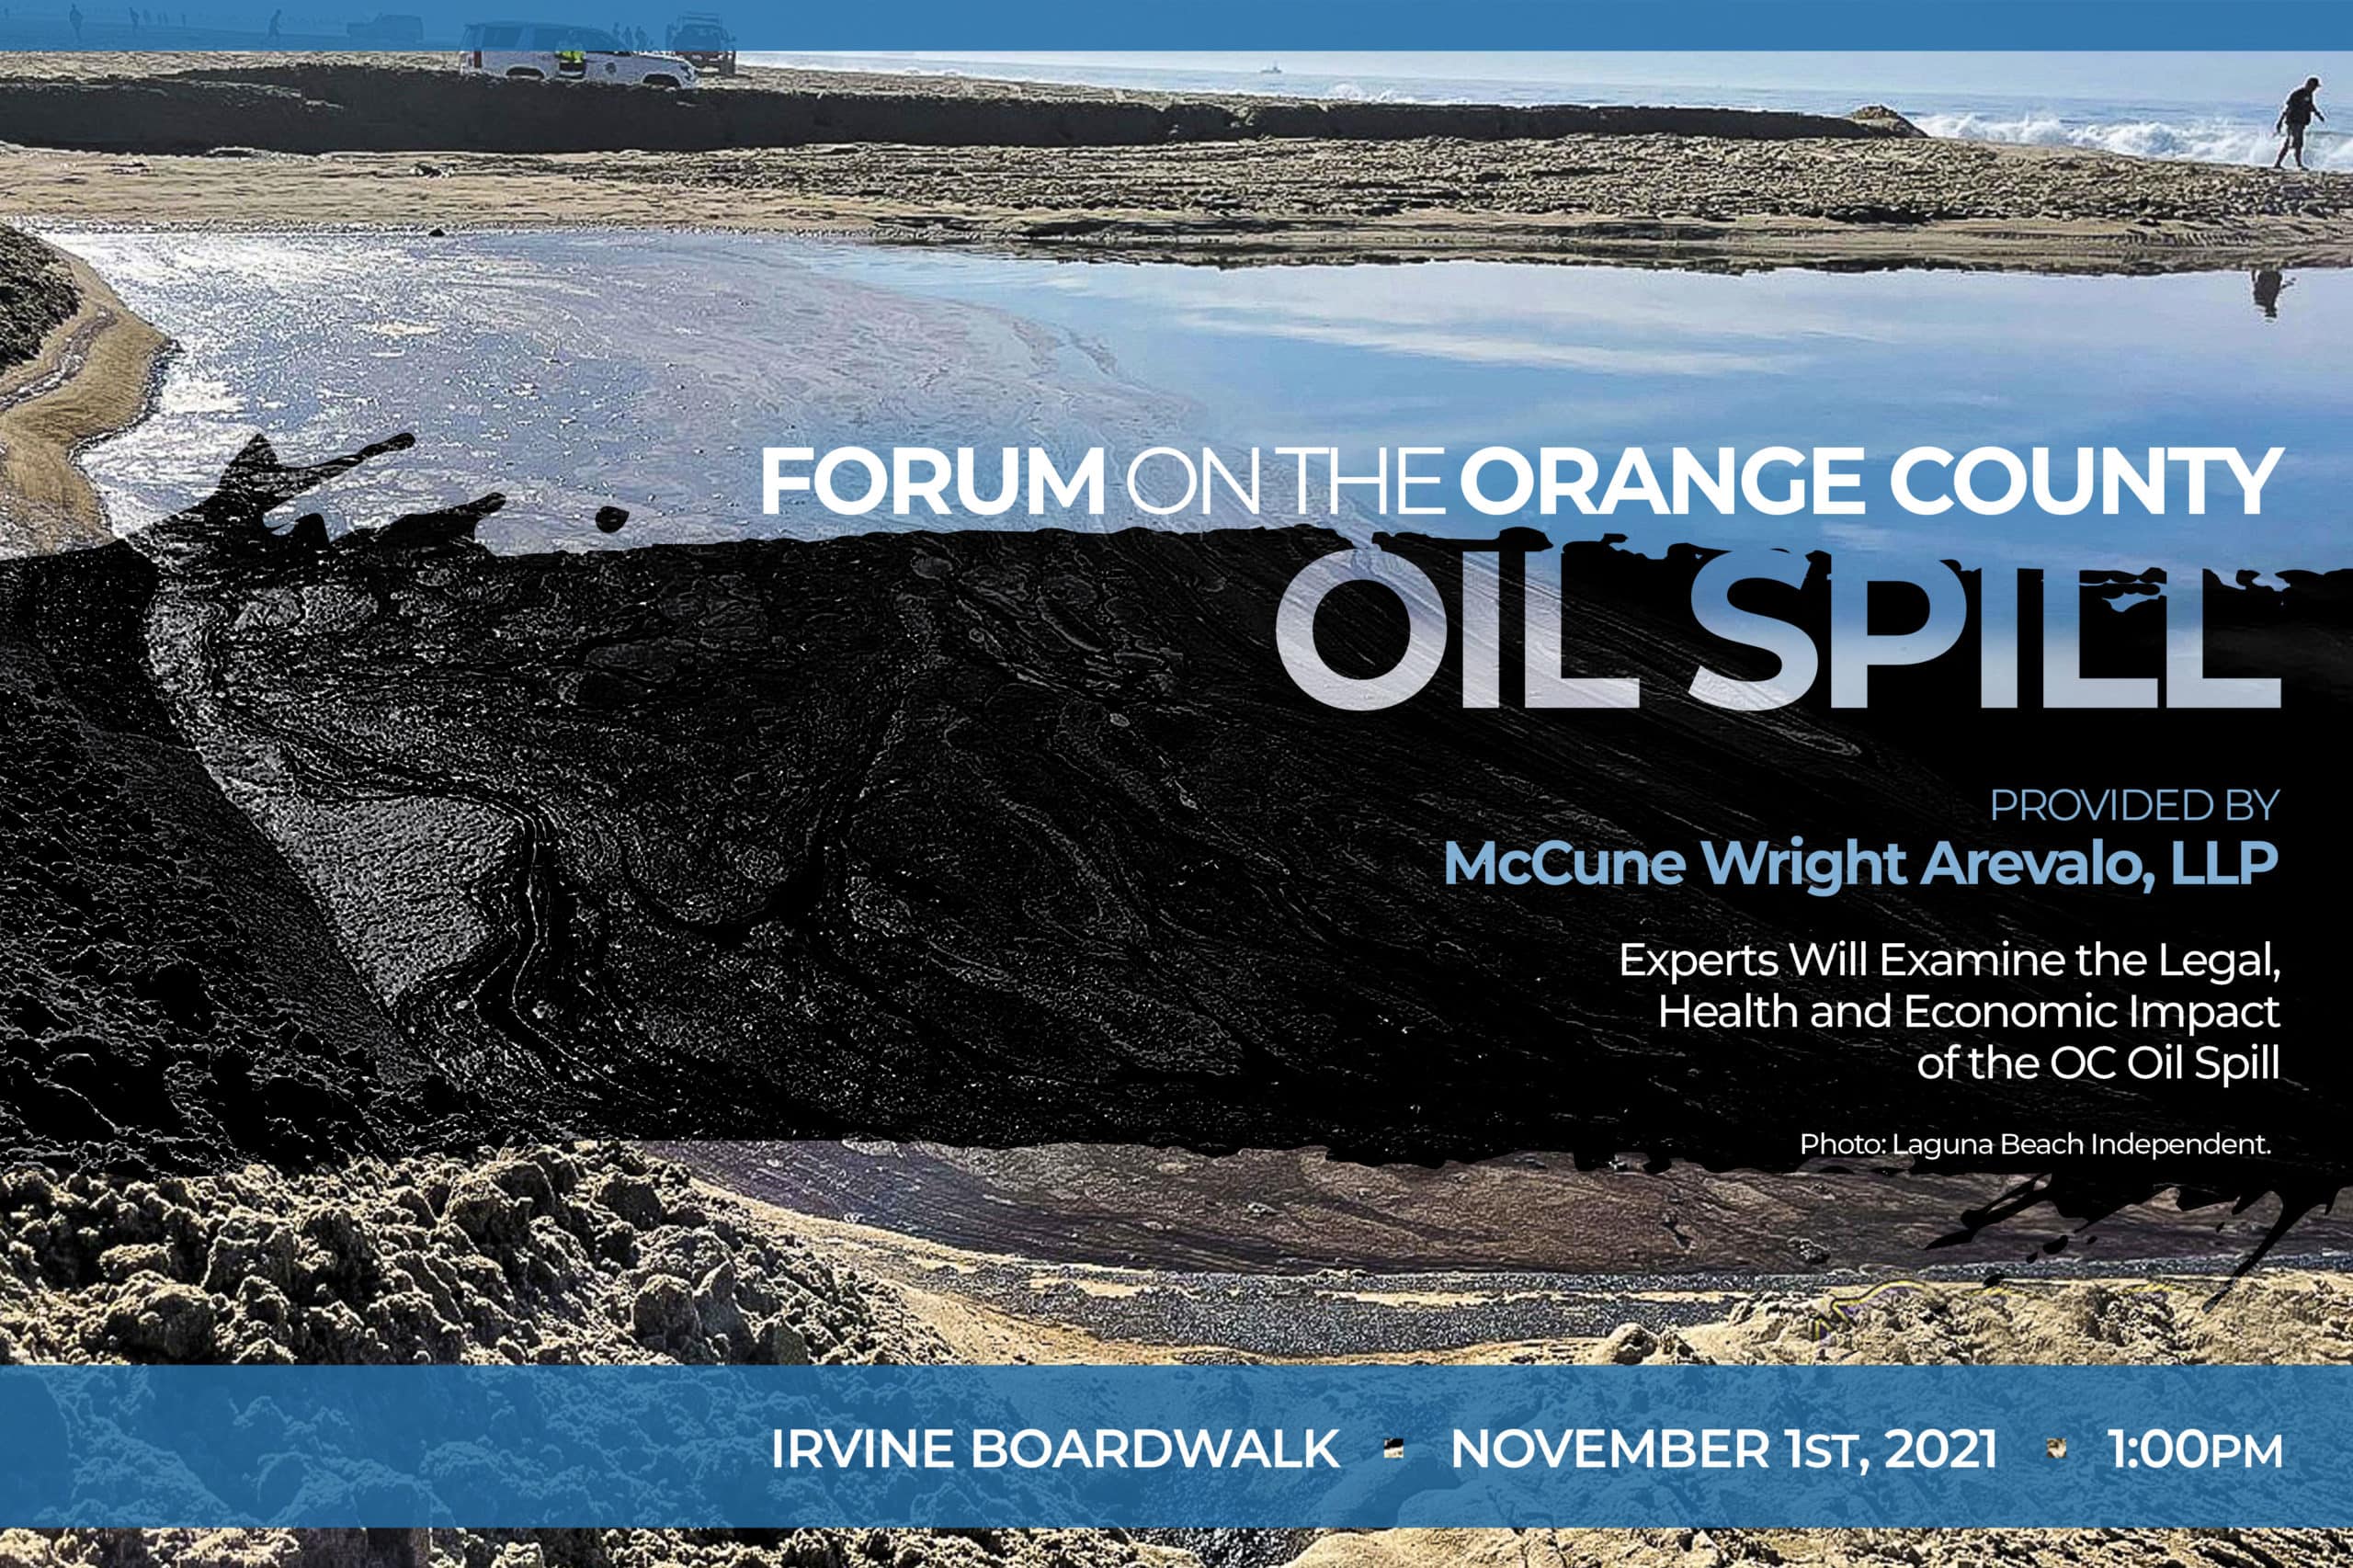 Promotional image for Forum on the Orange County Oil Spill